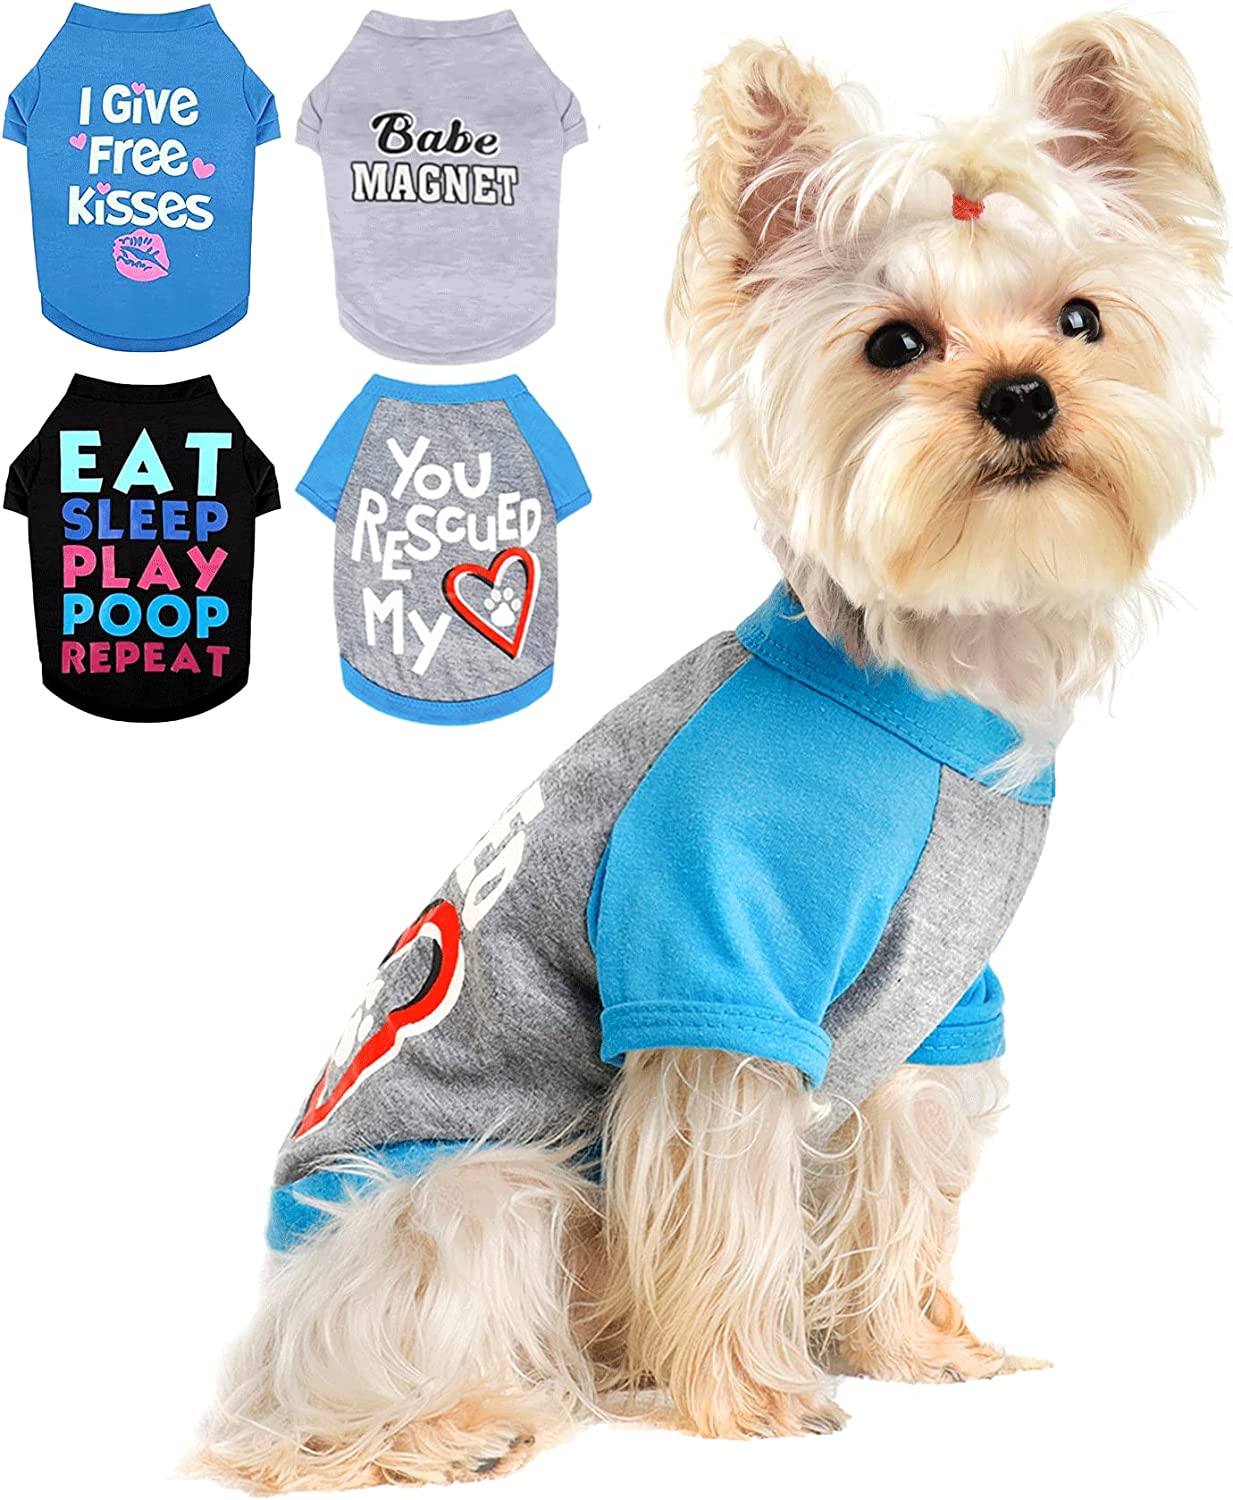 Tshirts for Small Dogs